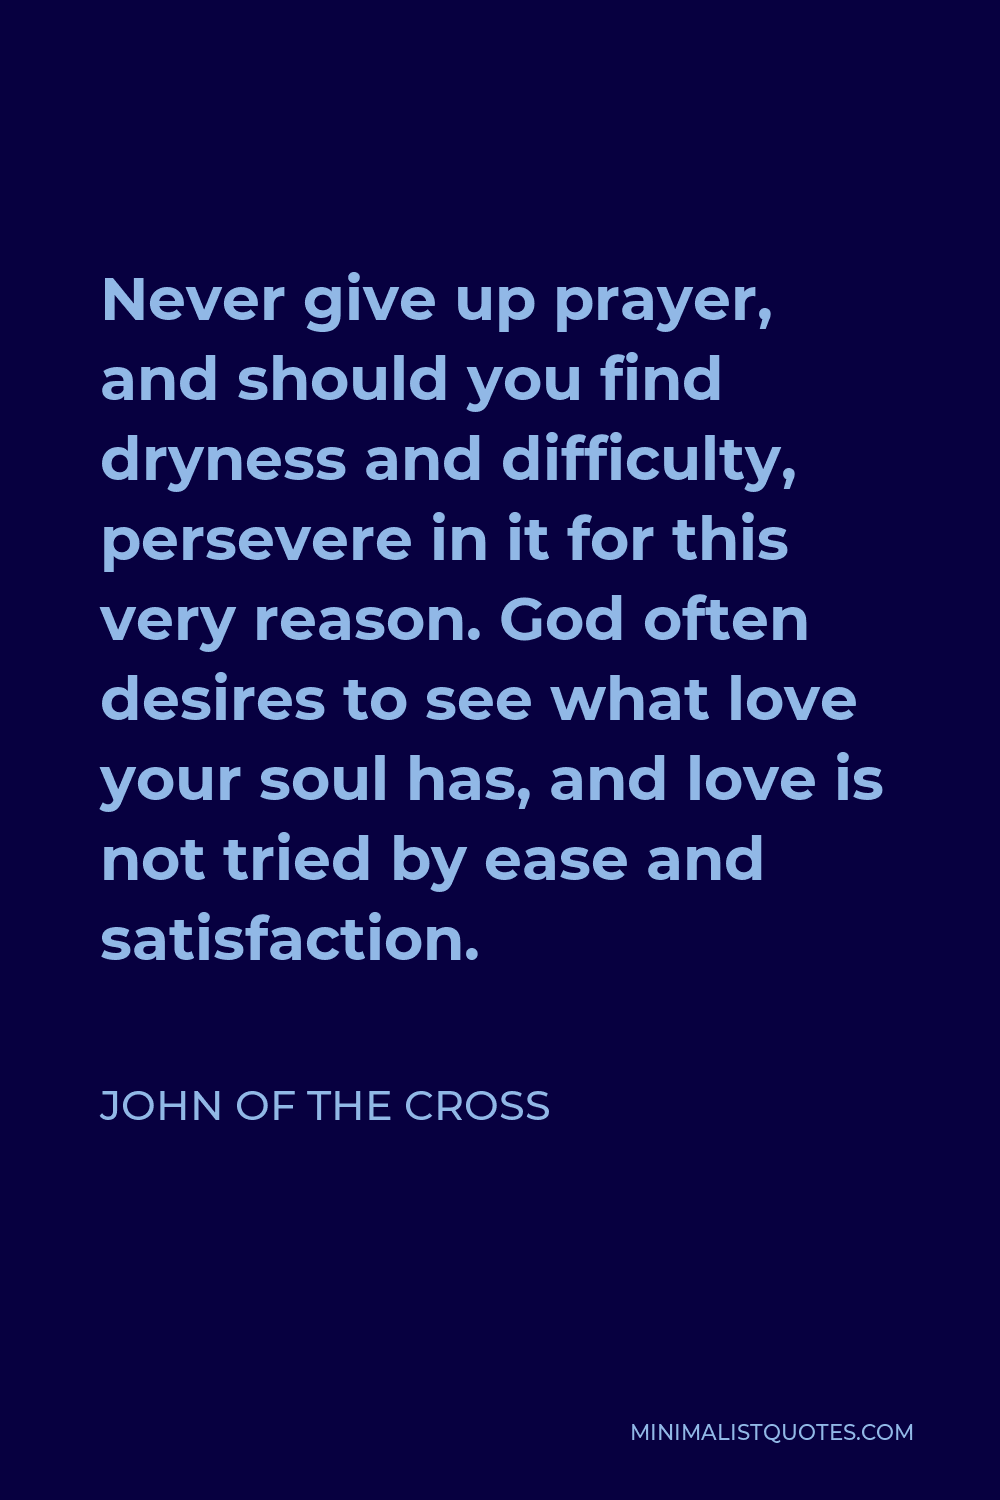 John of the Cross Quote - Never give up prayer, and should you find dryness and difficulty, persevere in it for this very reason. God often desires to see what love your soul has, and love is not tried by ease and satisfaction.